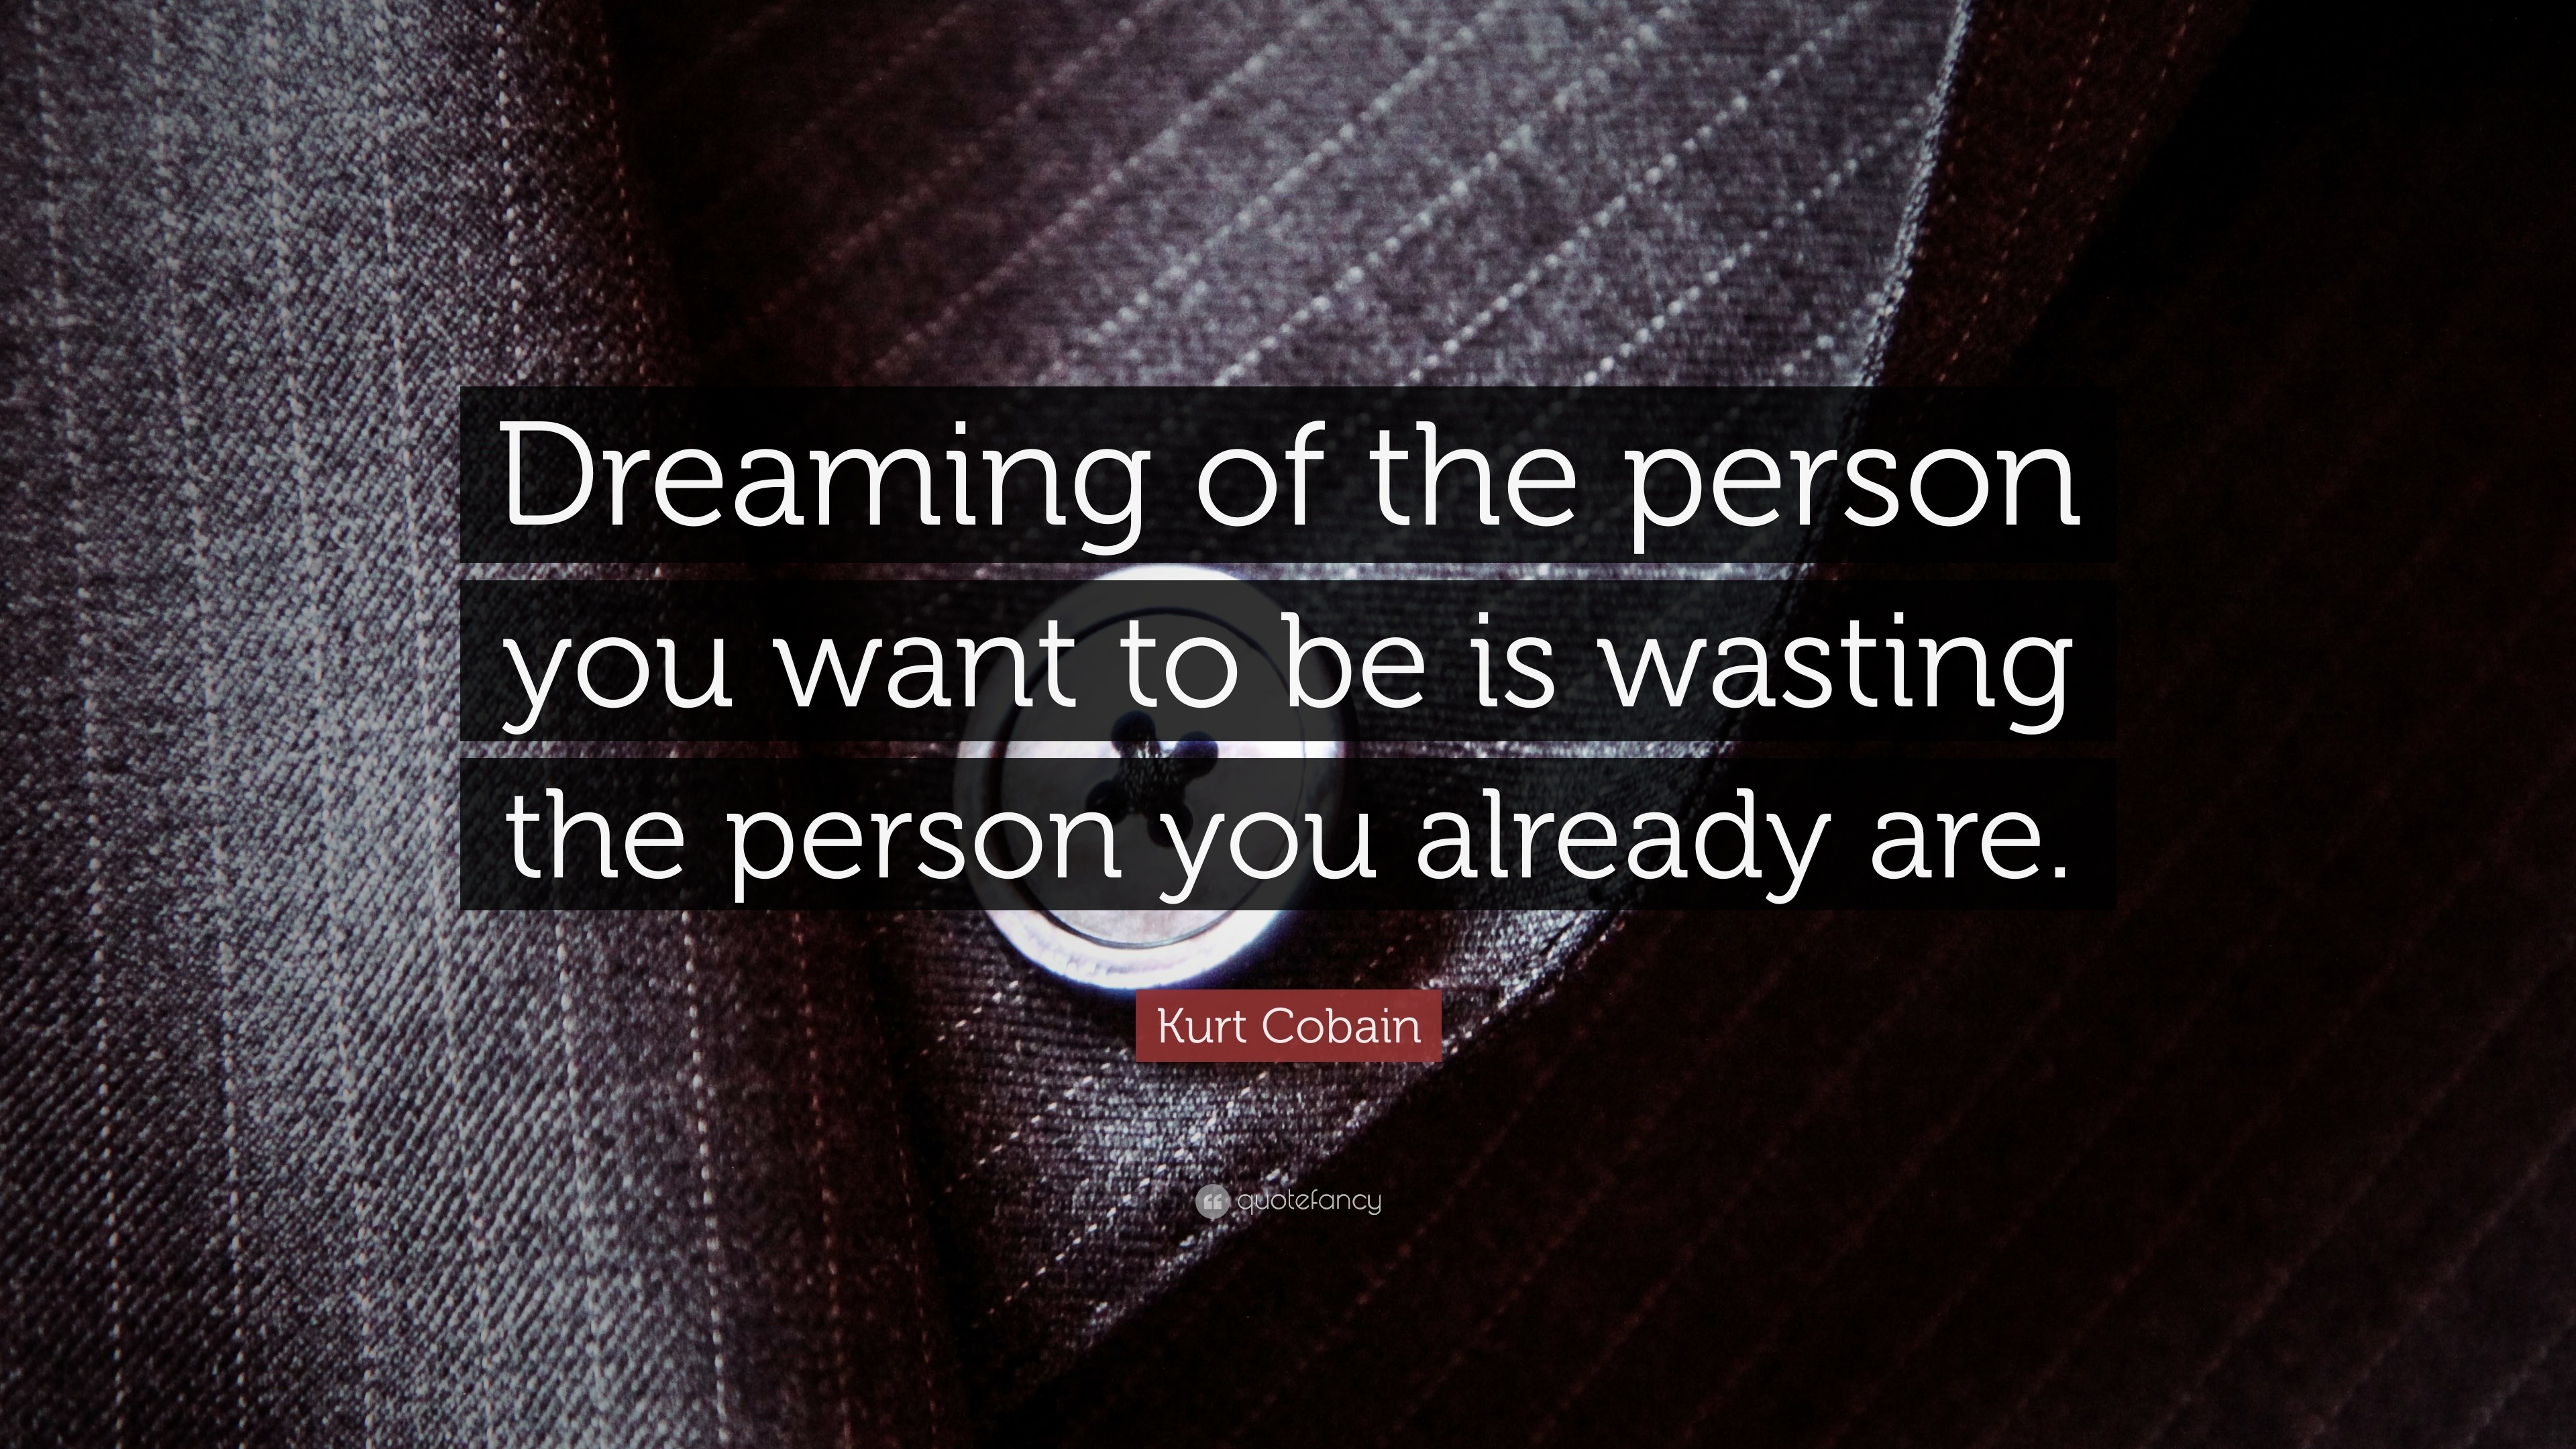 Kurt Cobain Quote “Dreaming of the person you want to be is wasting the